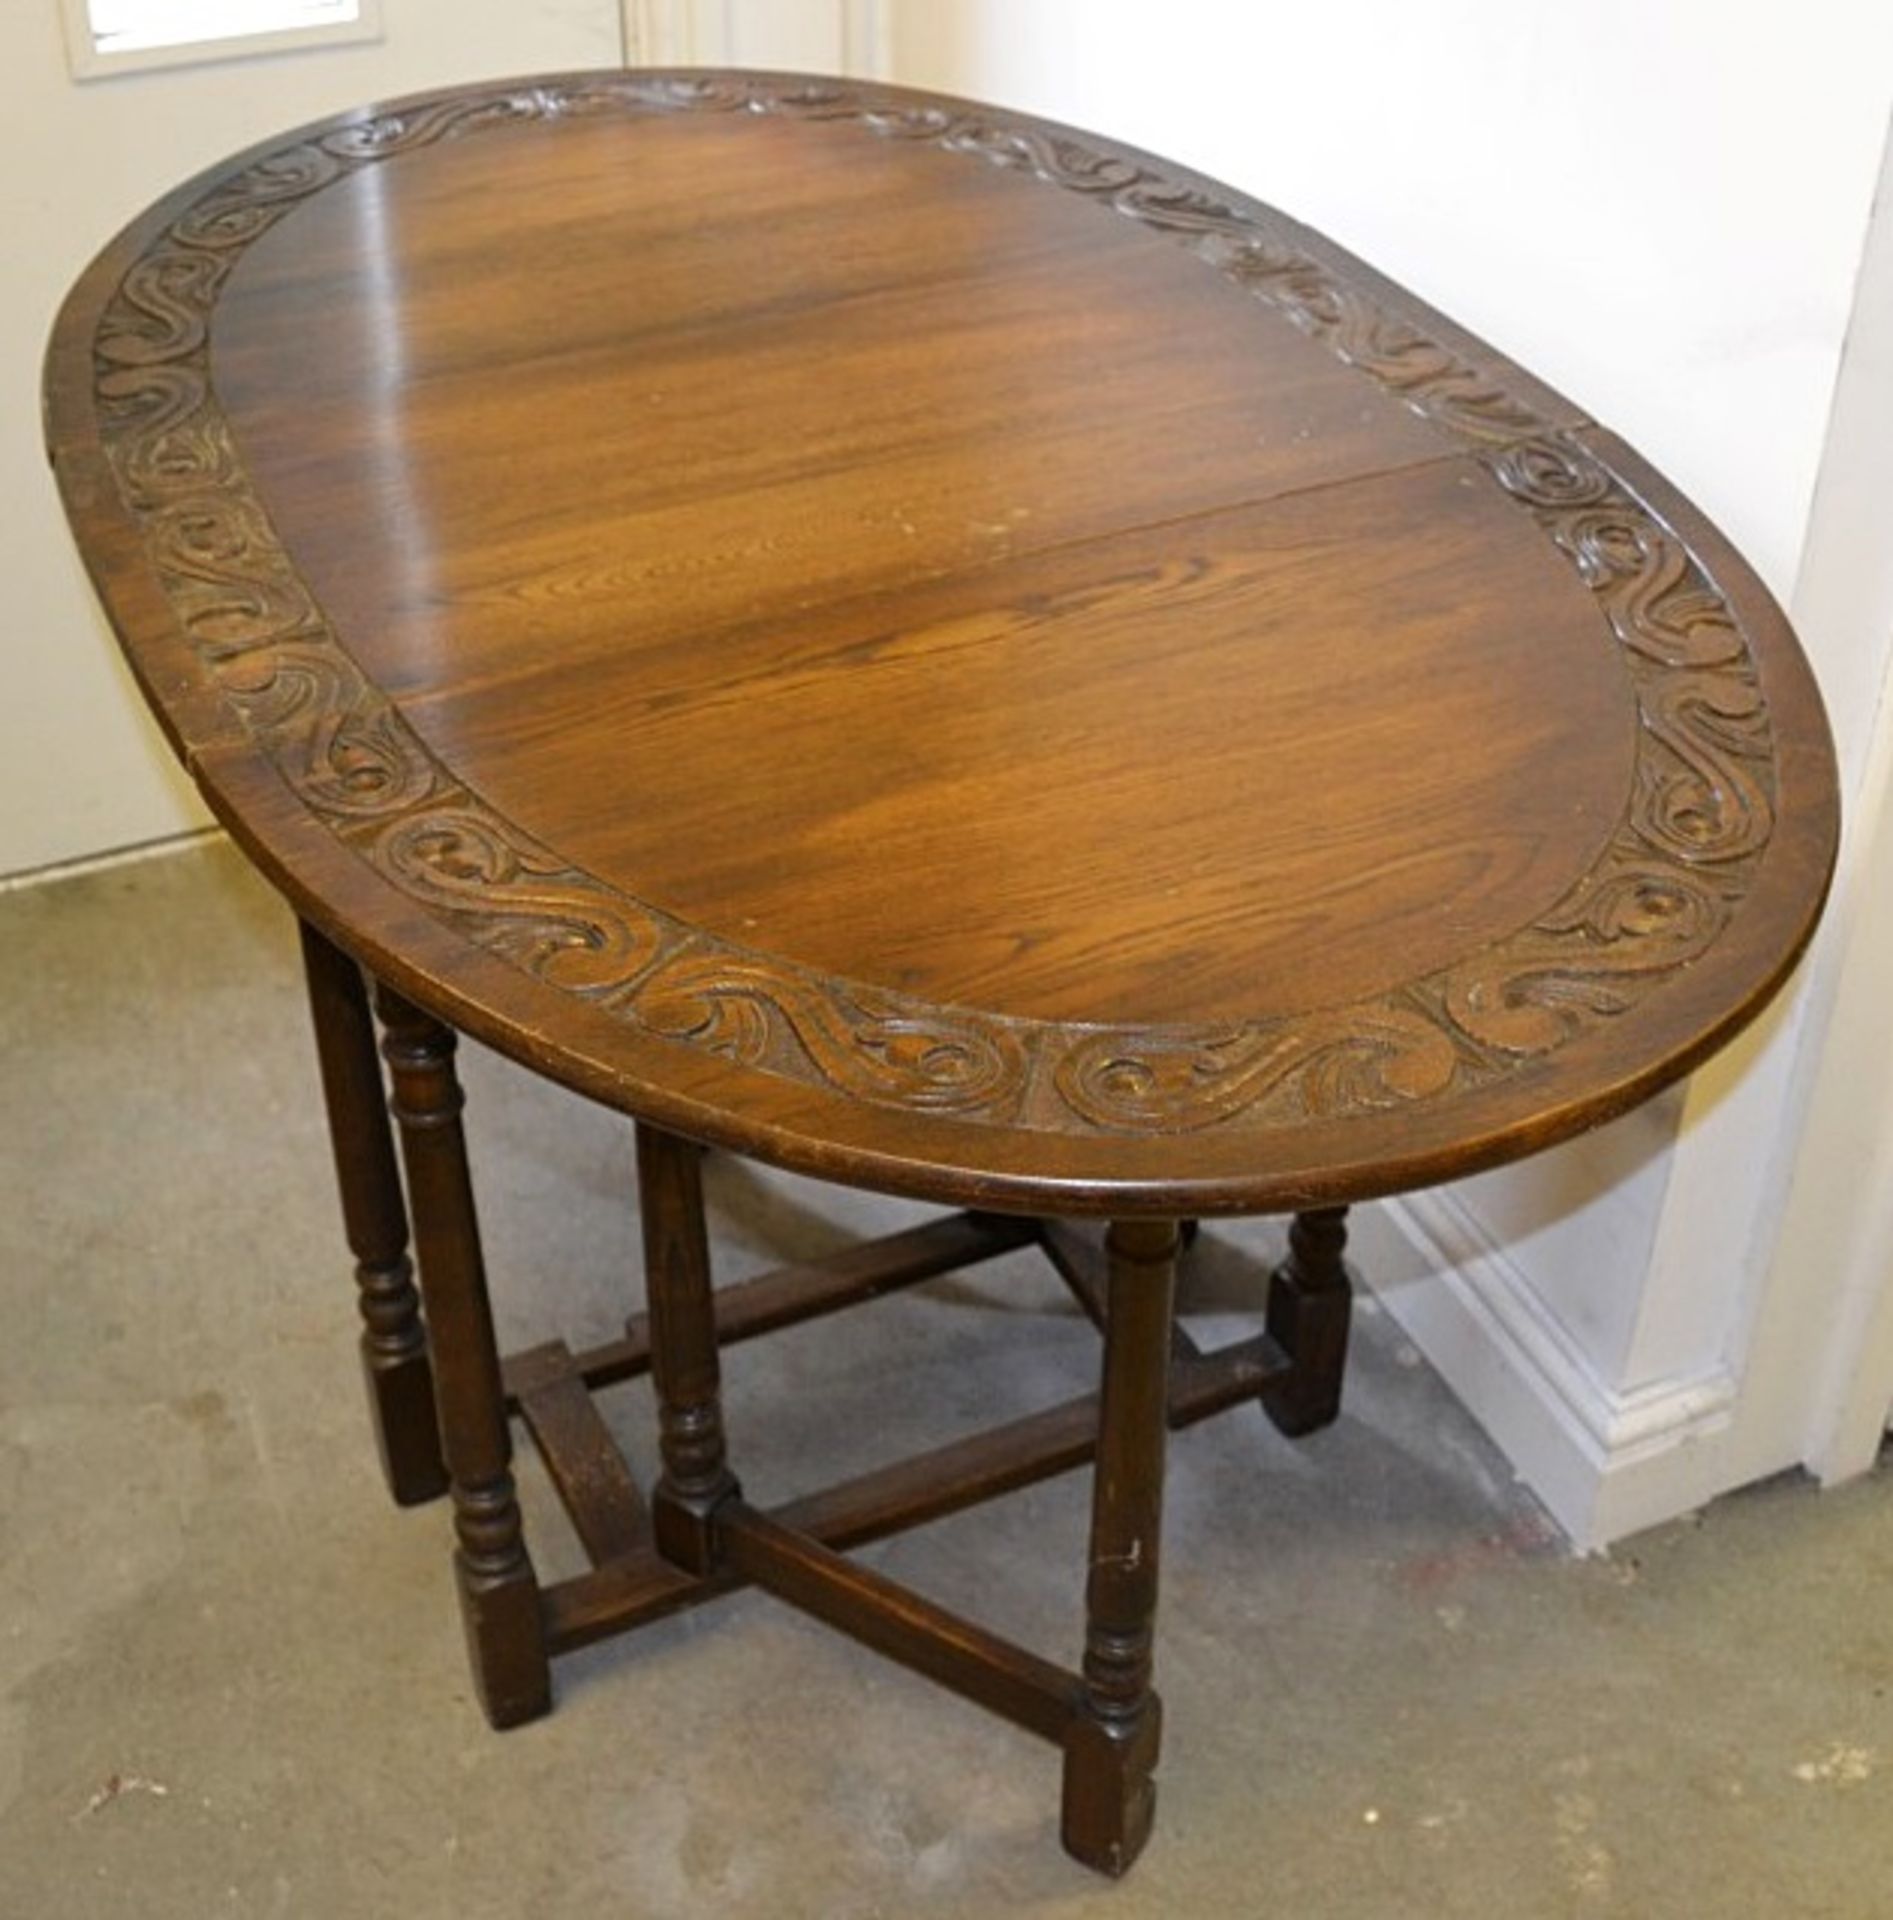 1 x Vintage Drop Leaf Solid Wood Table With Carved Floral Decoration - From A Grade II Listed Hall - Image 5 of 9